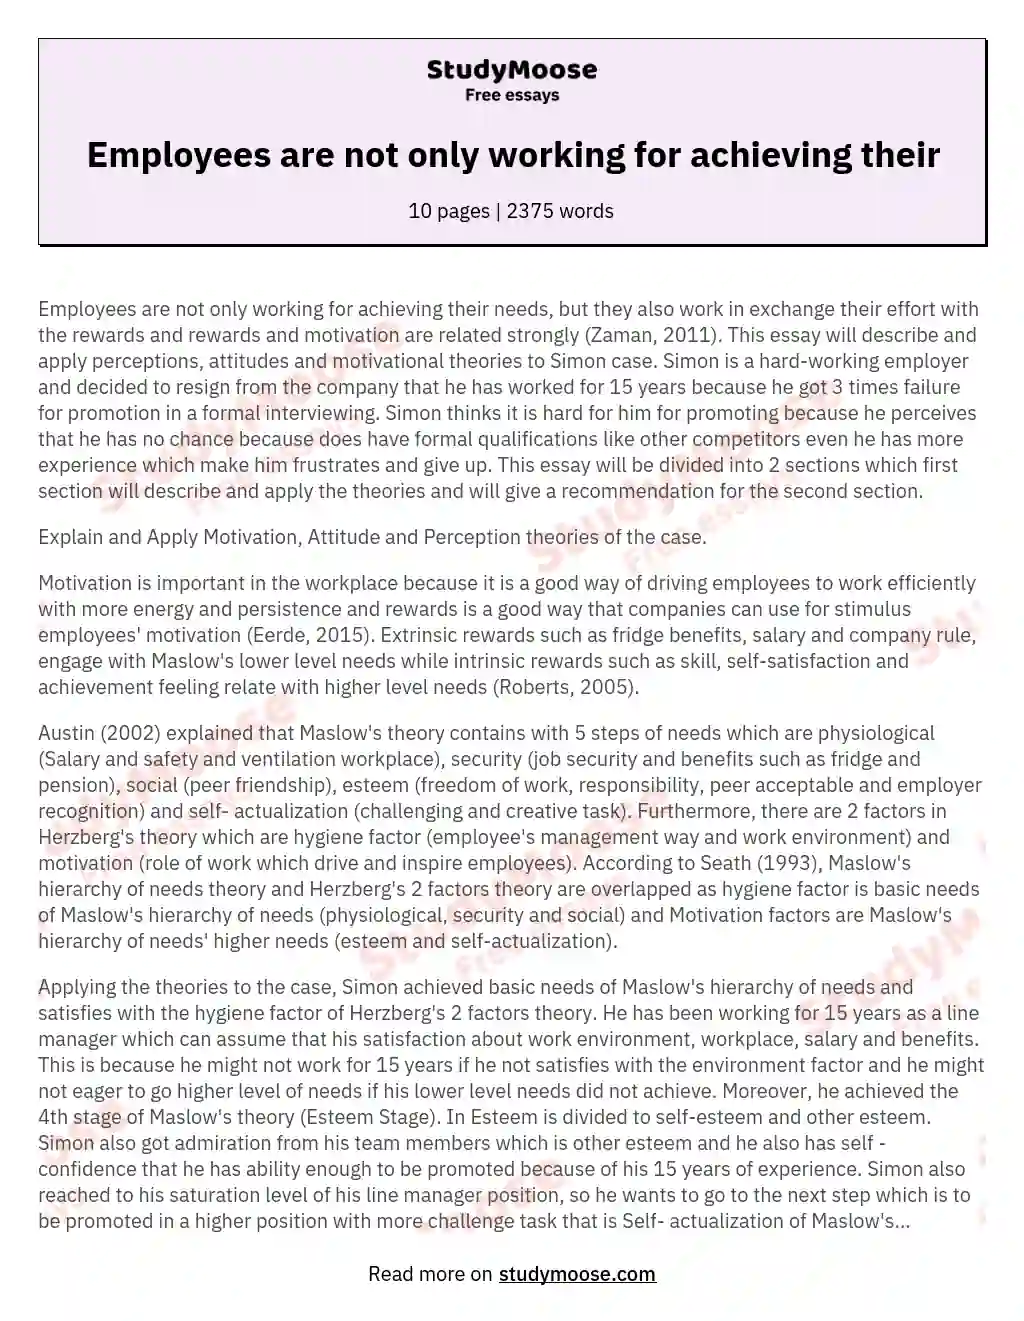 Employees are not only working for achieving their